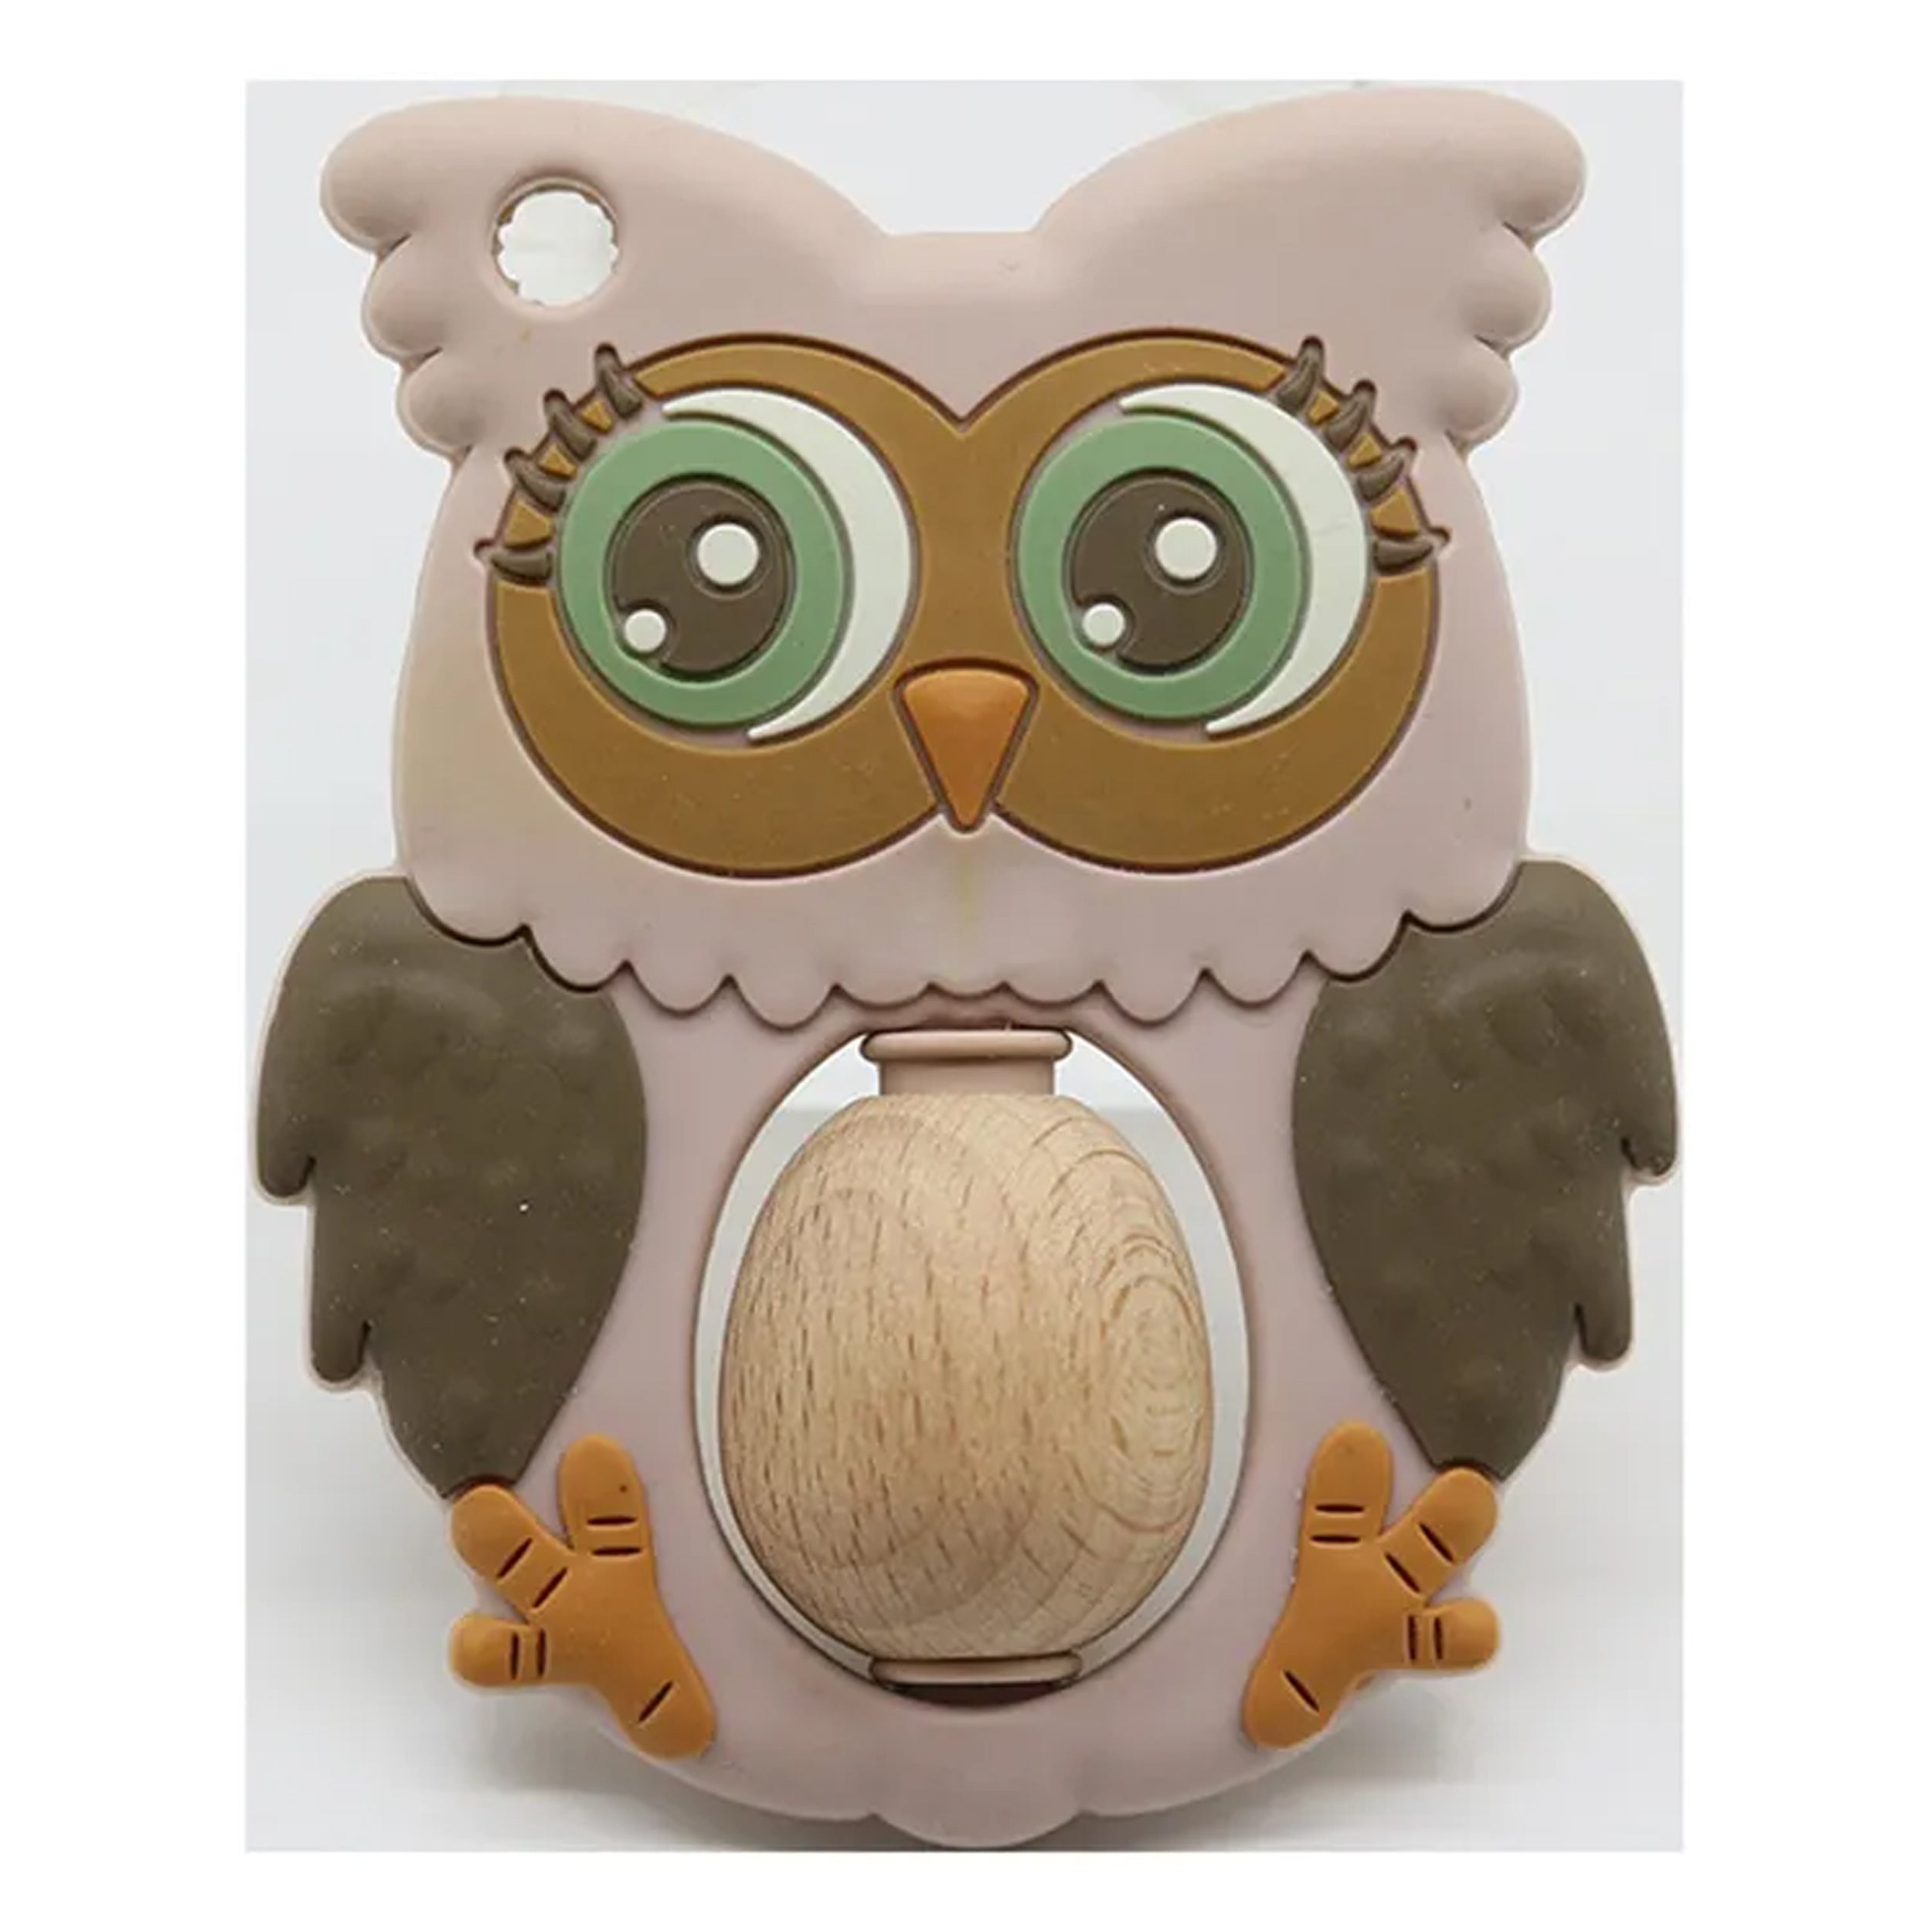 Safe Owl Baby Teething Toys for Newborn Infants | BPA-Free and Non-Toxic